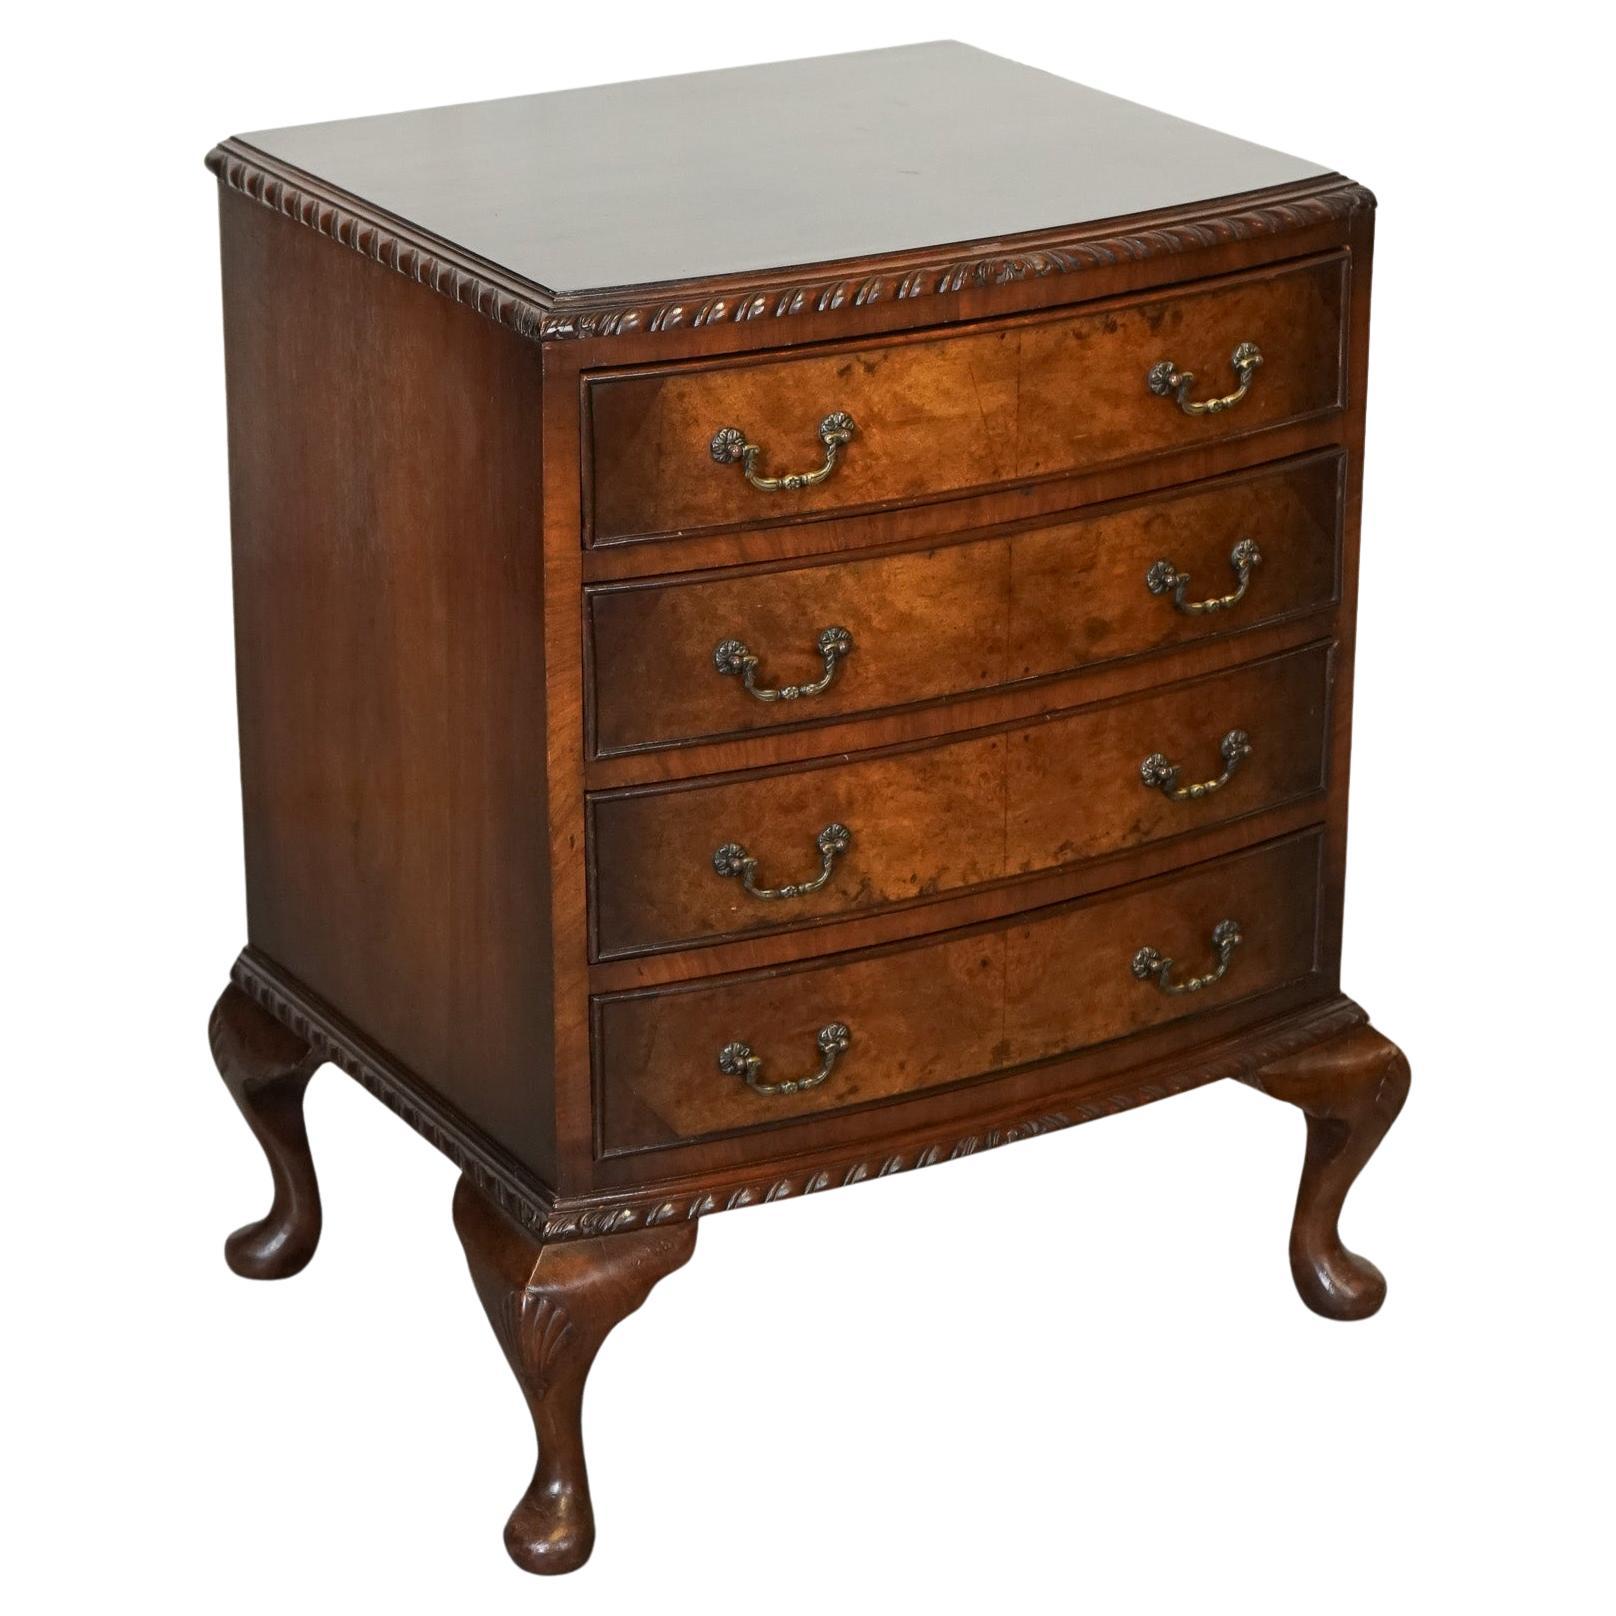 FIGURED VICTORIAN WALNUT BOW FRONTED CHEST OF DRAWERS RAisted ON QUEEN ANNE LEGS